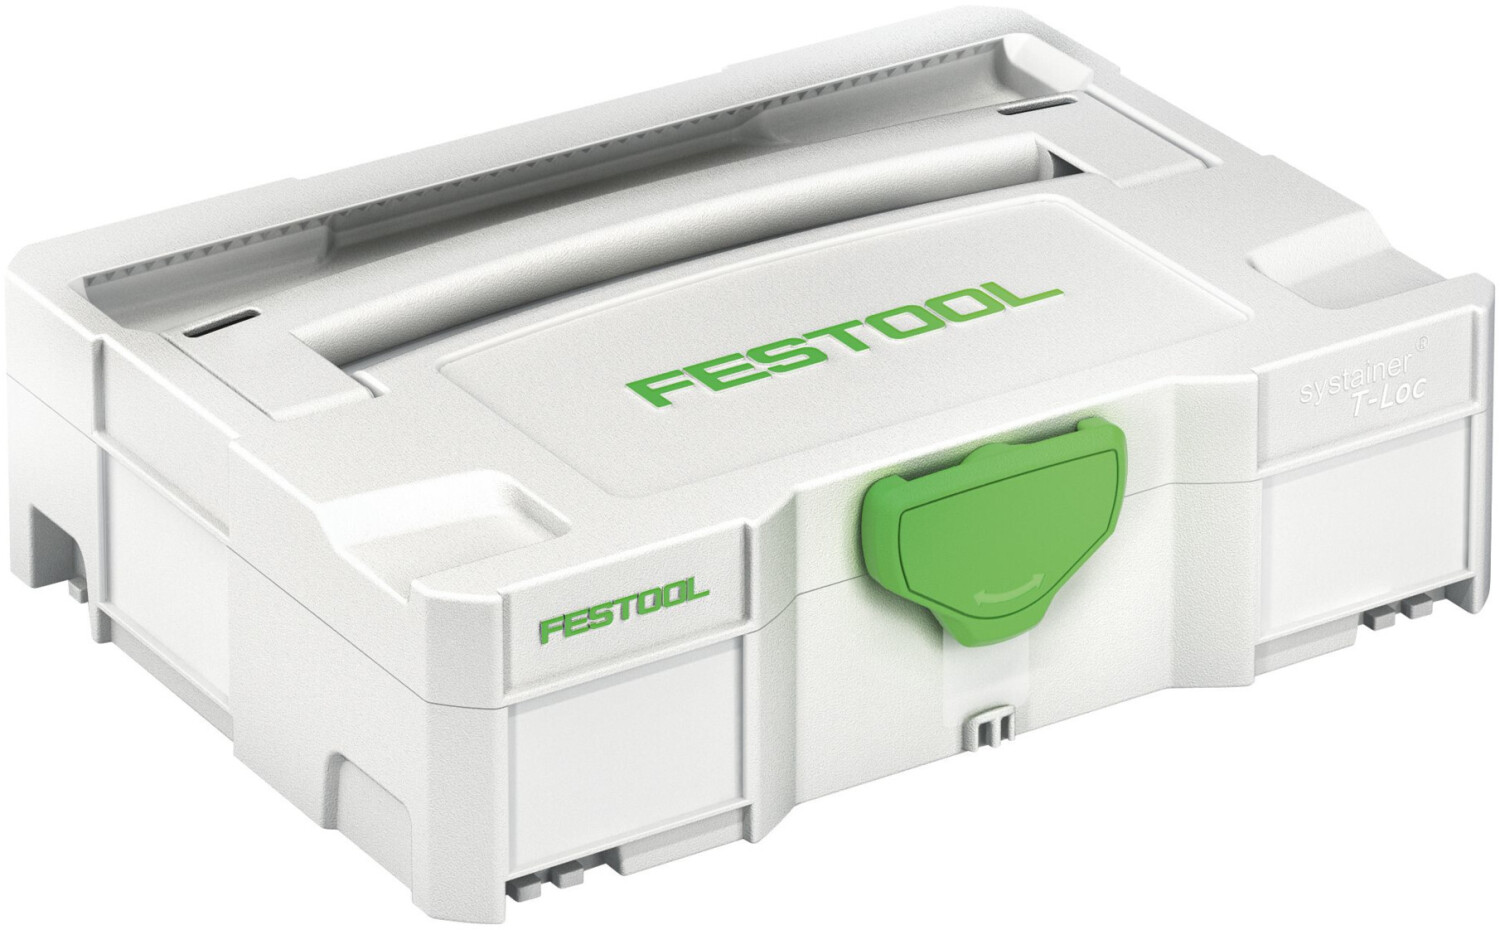 Festool 203813 Mini SYSTAINER T-LOC with Transparent Lid, 71.0 mm